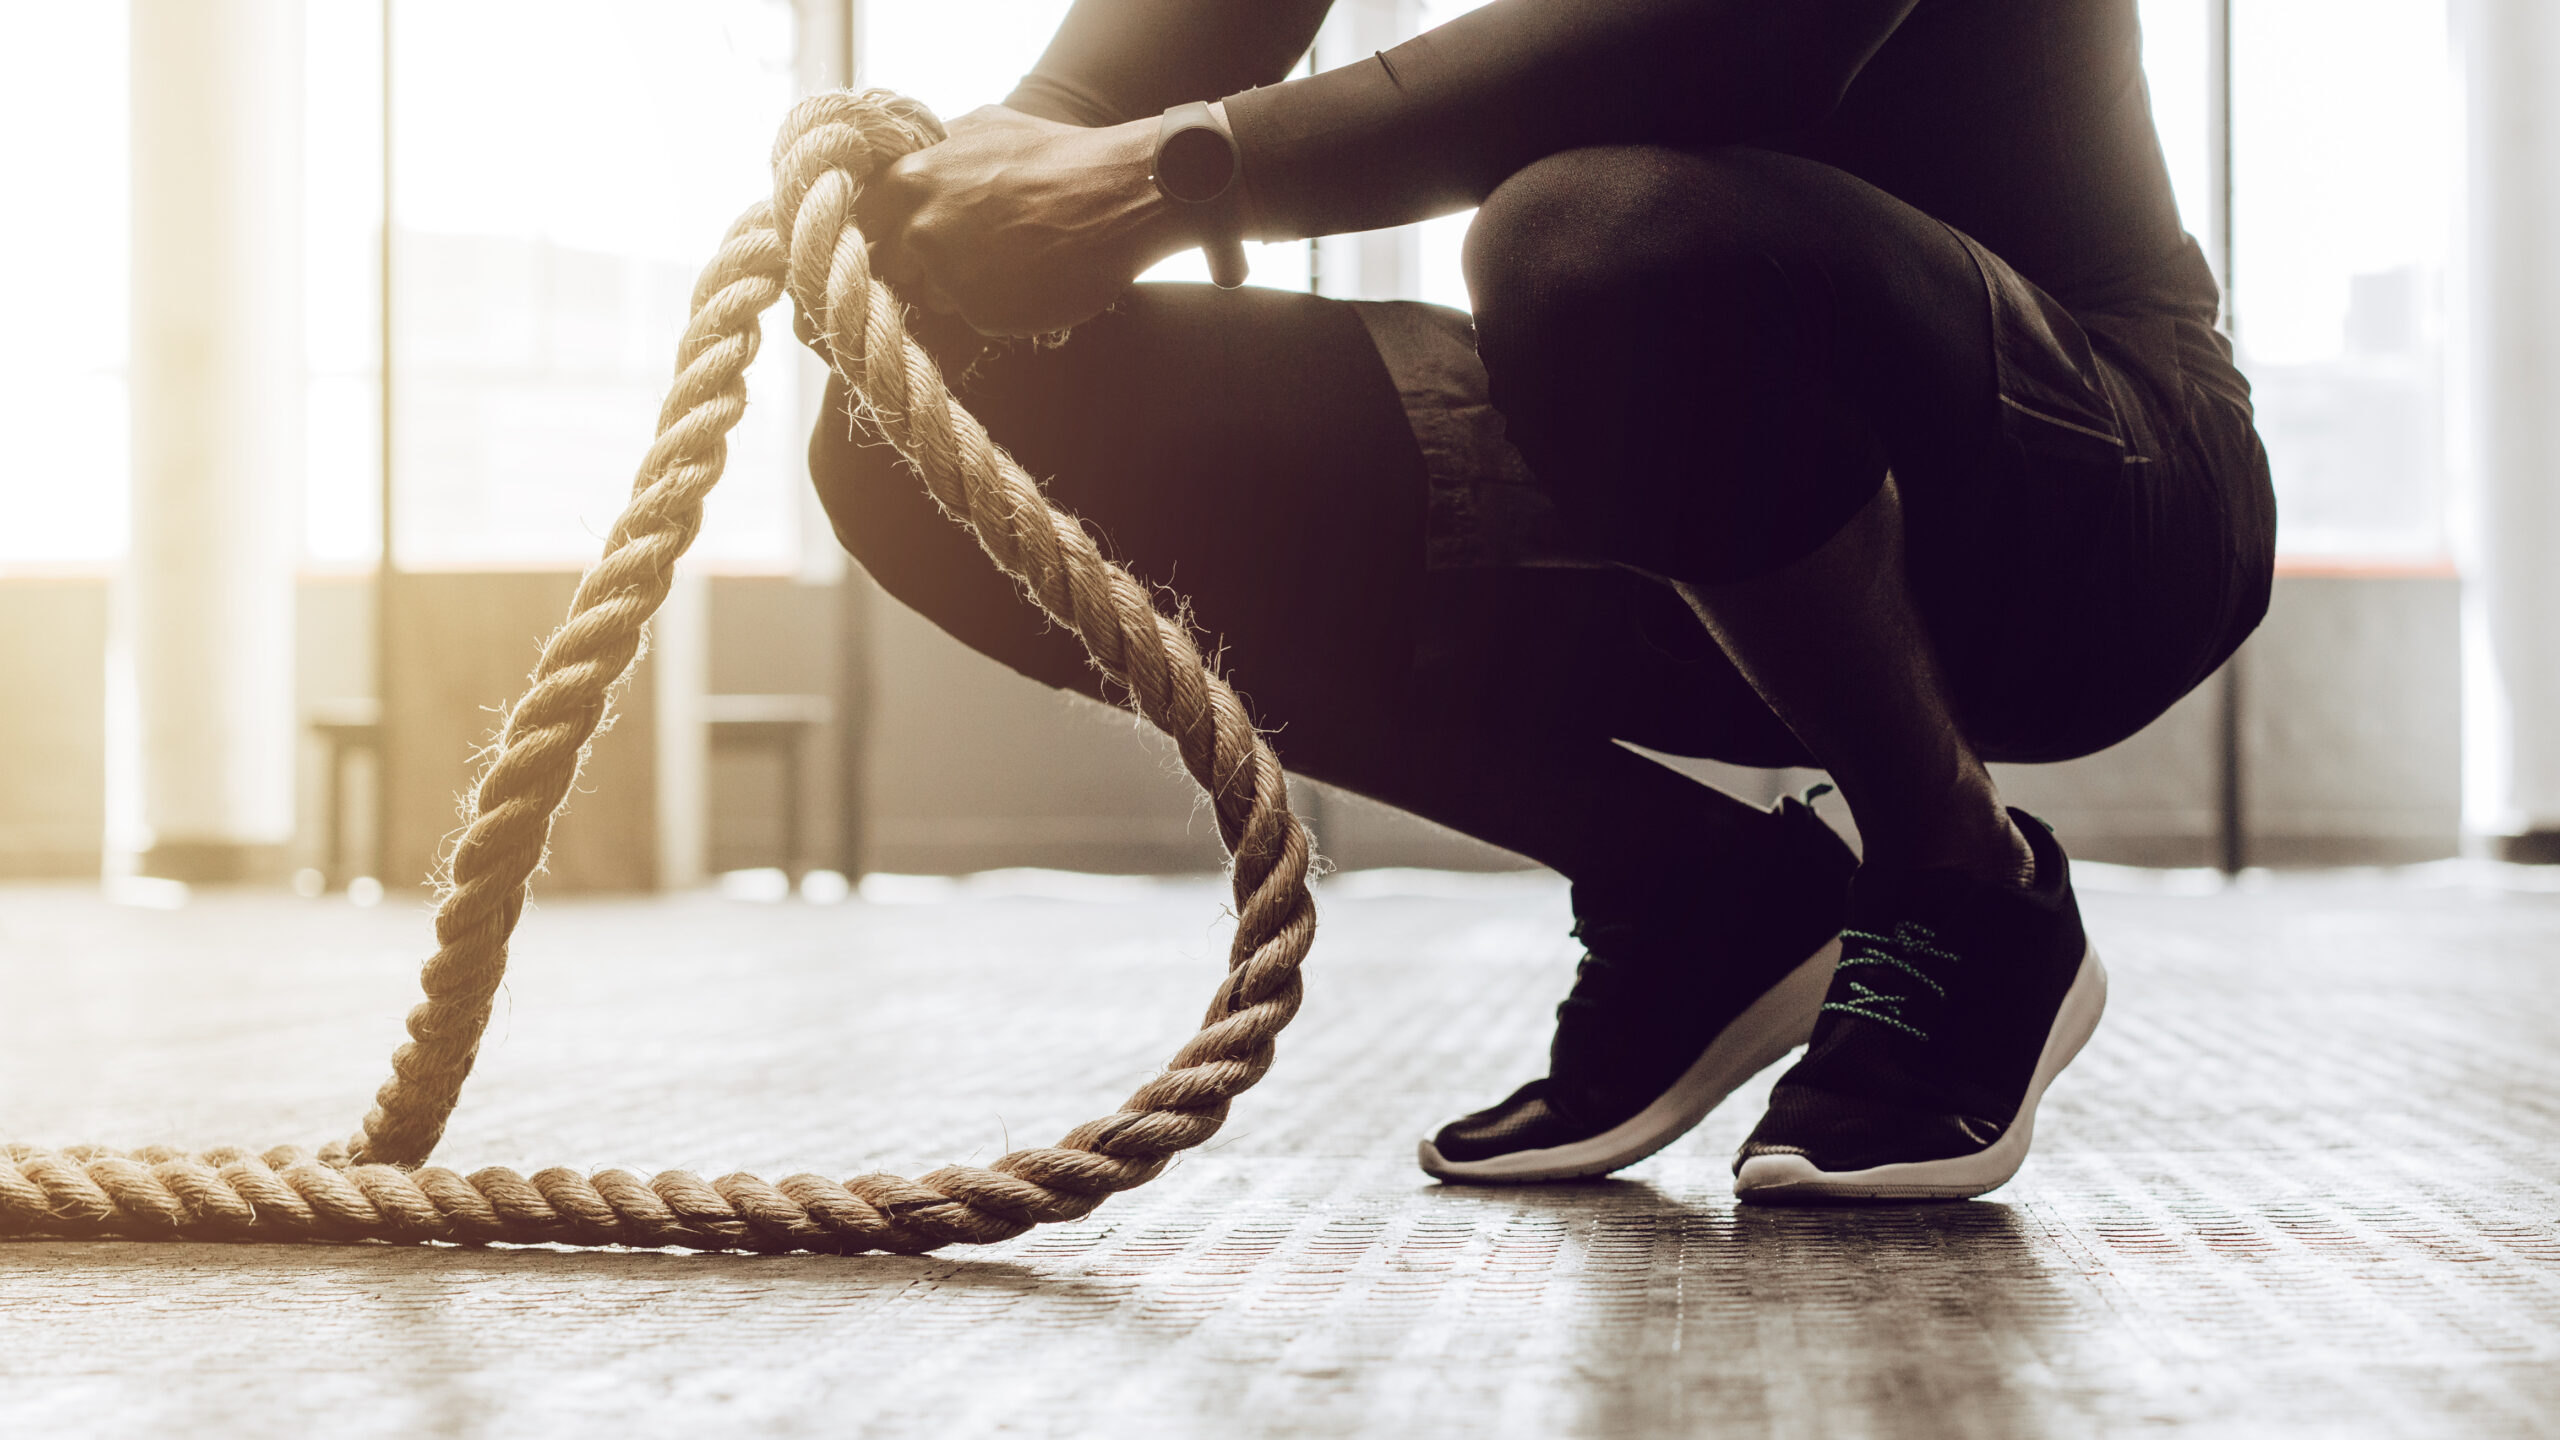 Close up of a man sitting on his toes holding a pair of battle ropes for workout. Crossfit guy at the gym working out with fitness rope.